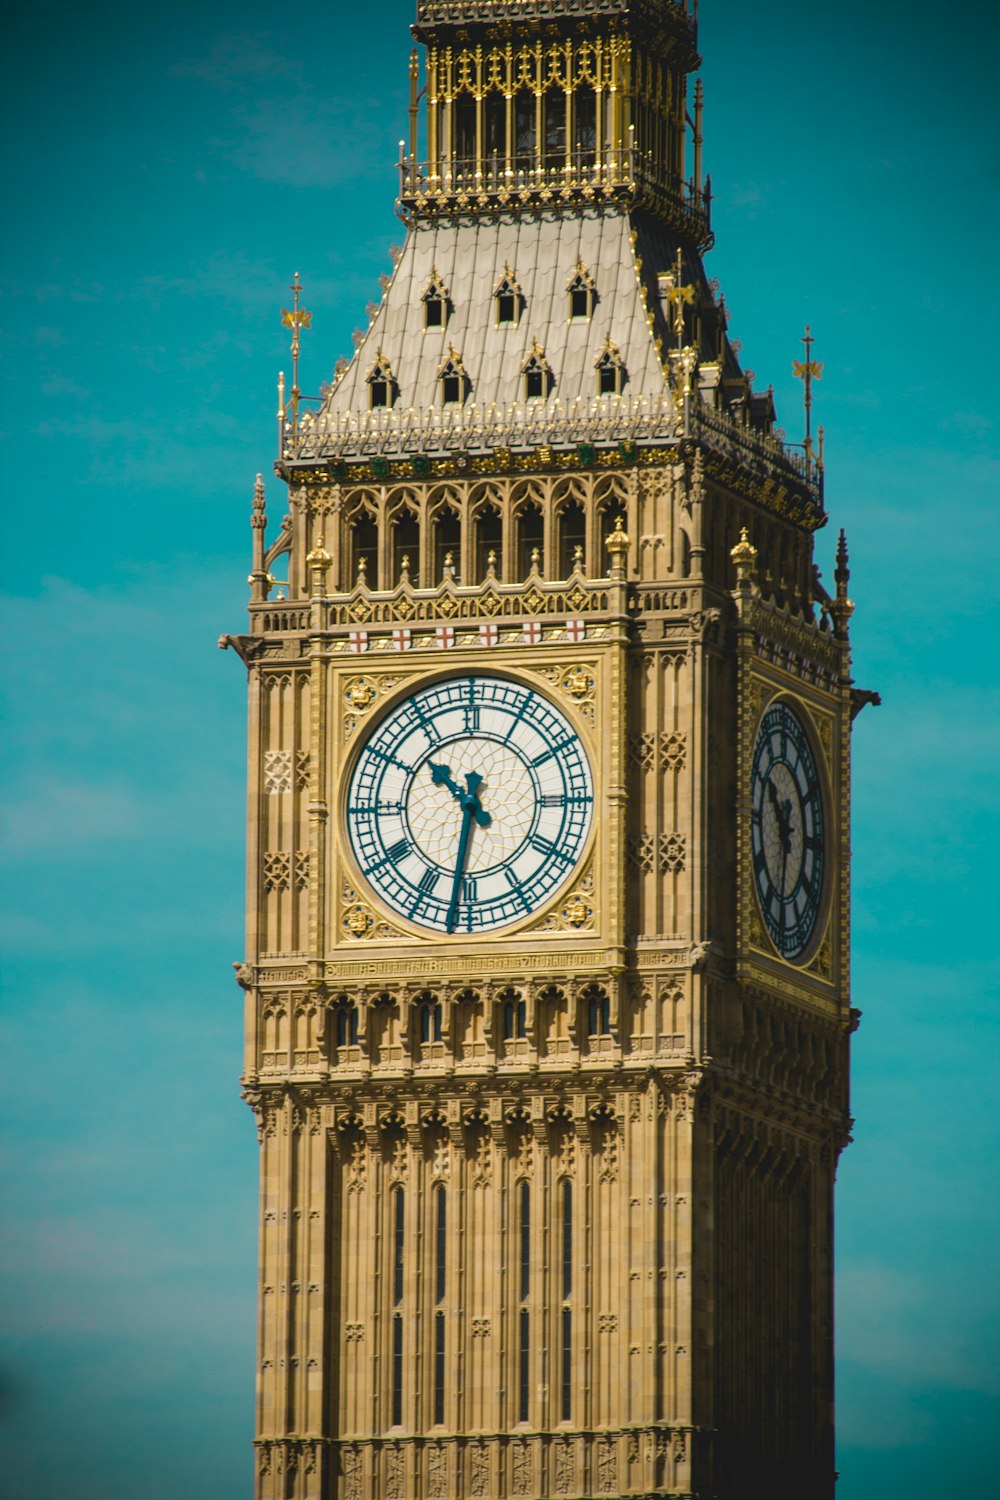 a large clock tower with Big Ben in the background